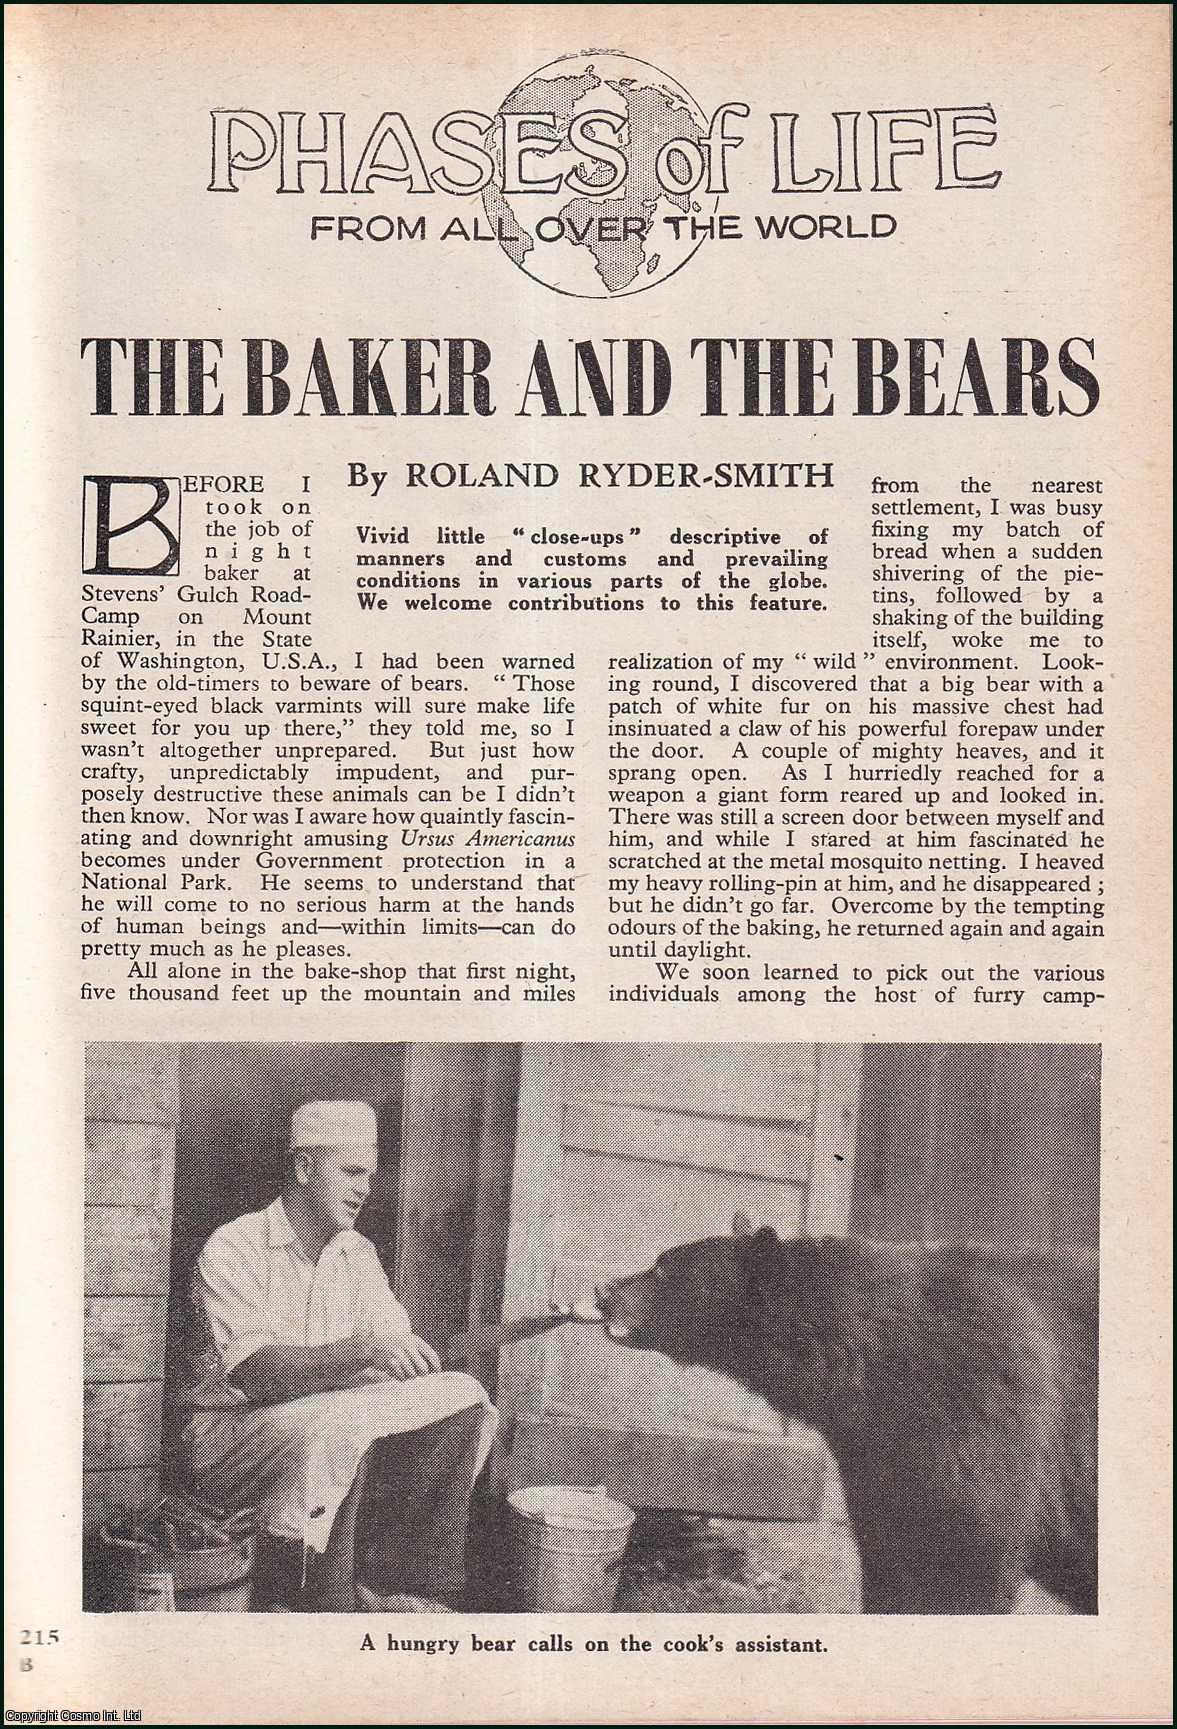 Roland Ryder-Smith - The Night Baker at Stevens Gulch Road Camp on Mount Rainier, in the State of Washington, U.S.A. & the Bears. An uncommon original article from the Wide World Magazine, 1948.